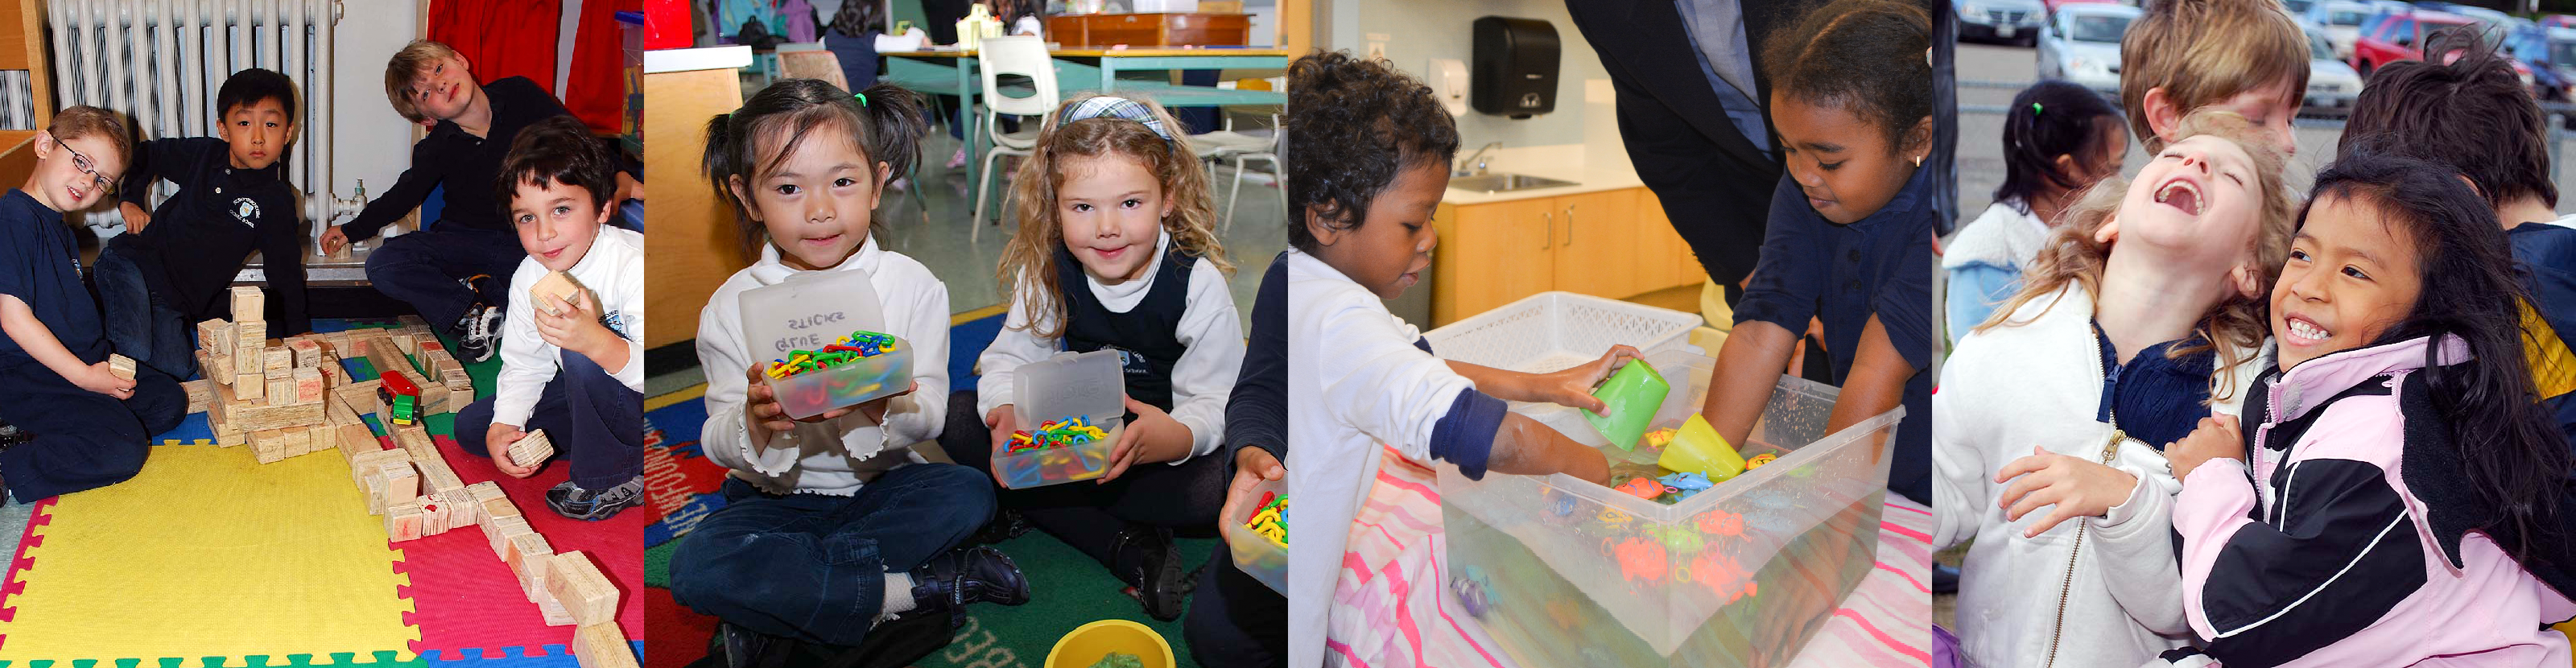 Photos of kindergarten students at play inside with building blocks, plastic links, and tubs of water, as well as enjoying the fresh air outside.